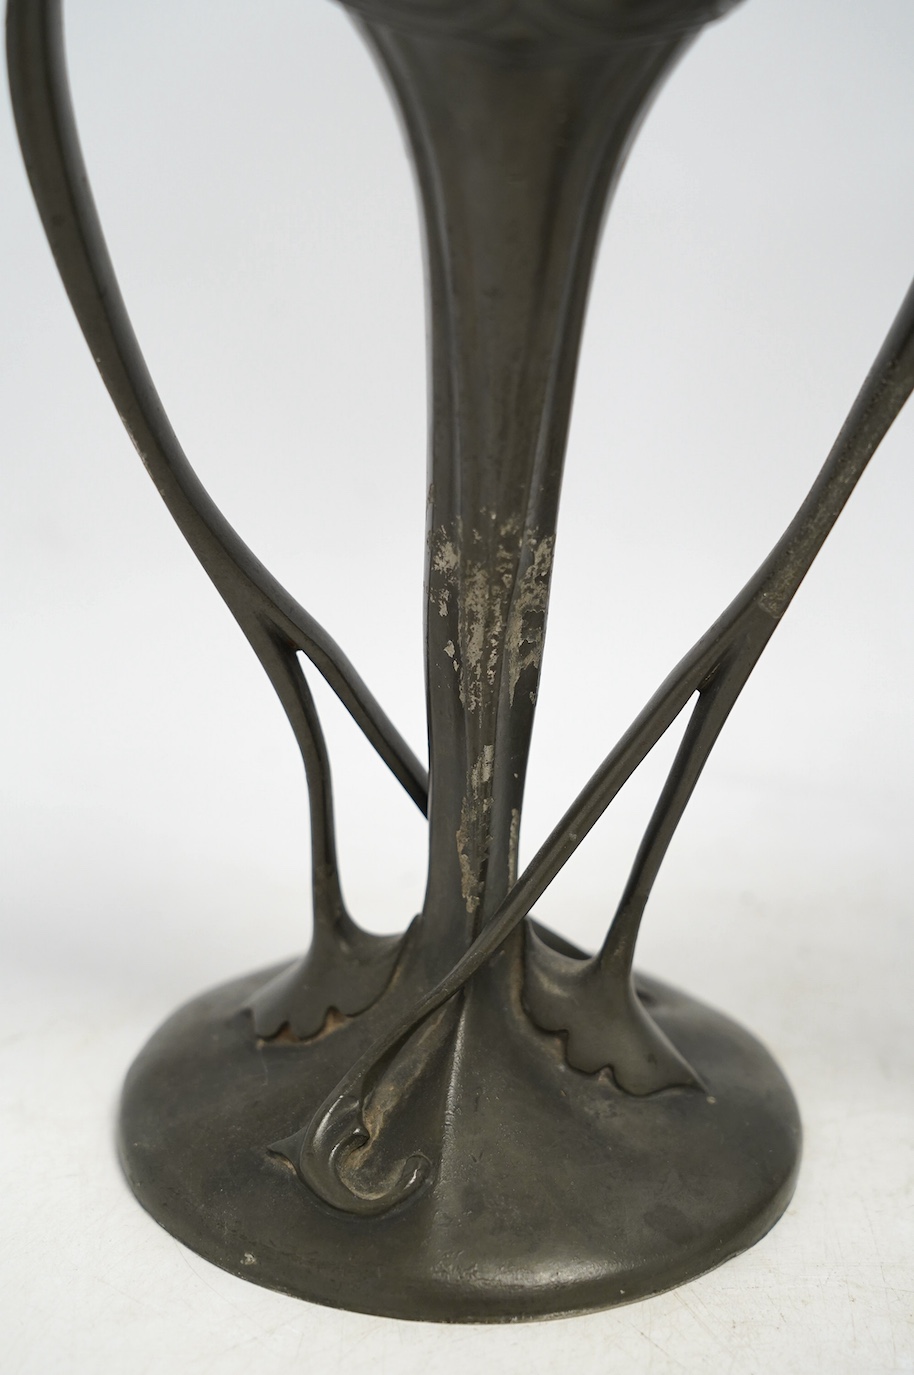 A pair of Art Nouveau Liberty Tudric pewter twin-handled vases, stamped to the bases, 25cm high. Condition - one good, the other poor to fair